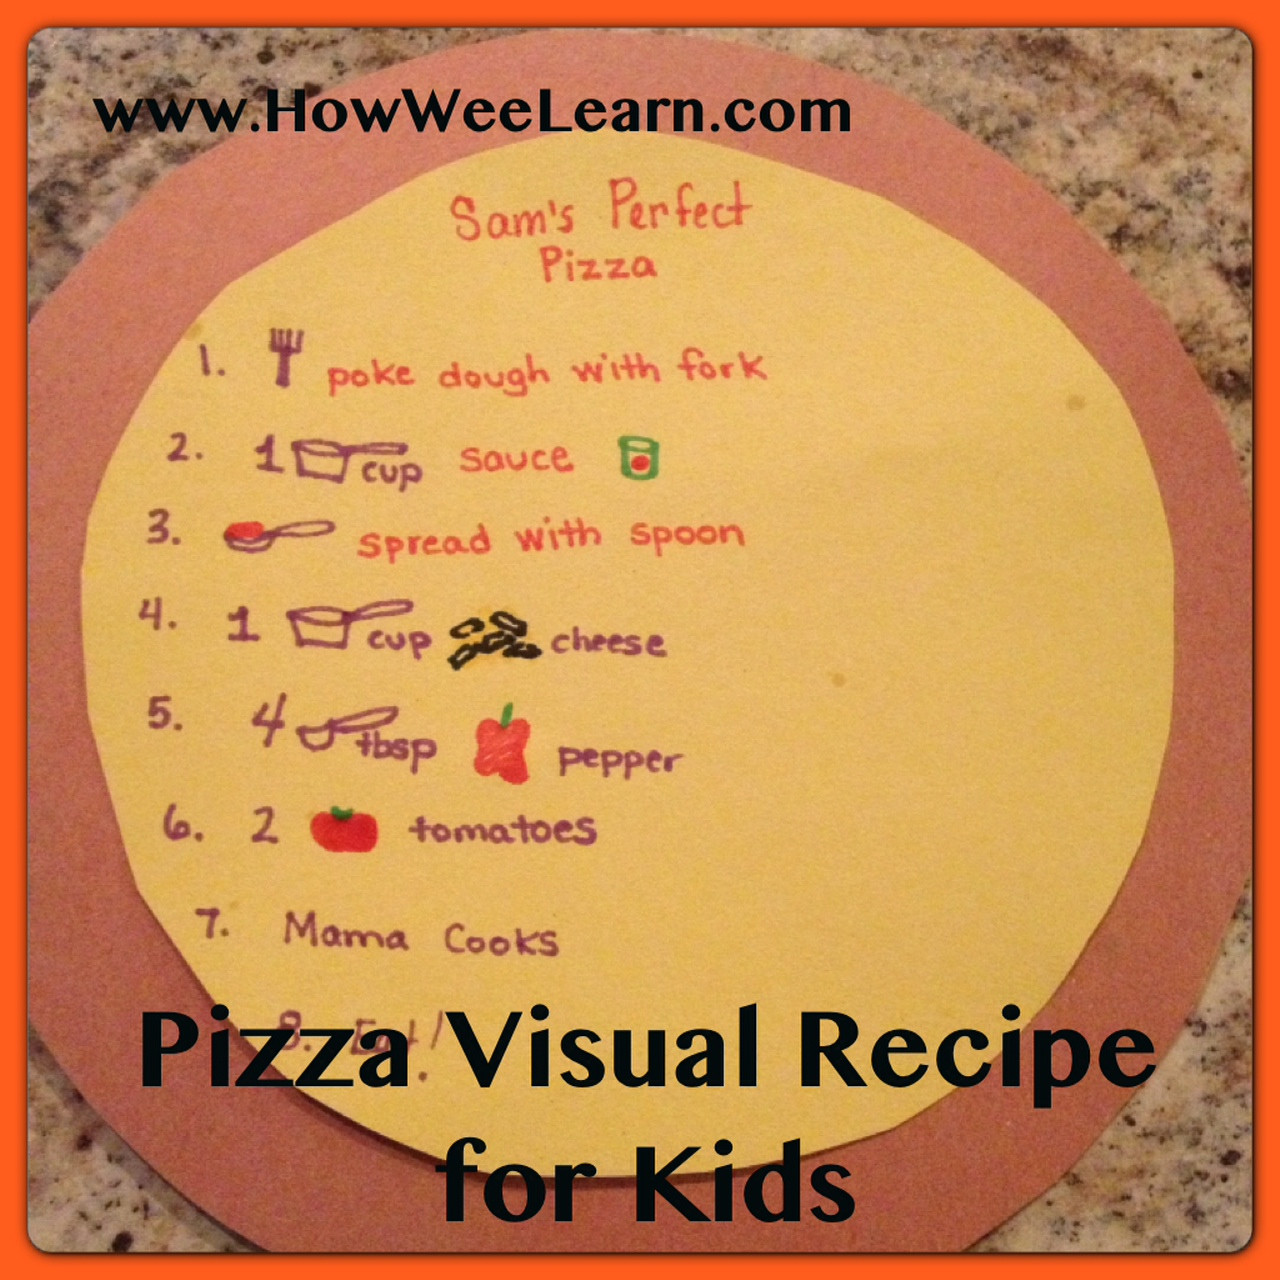 Pizza Recipes For Kids
 Recipes for Kids Pizza How Wee Learn